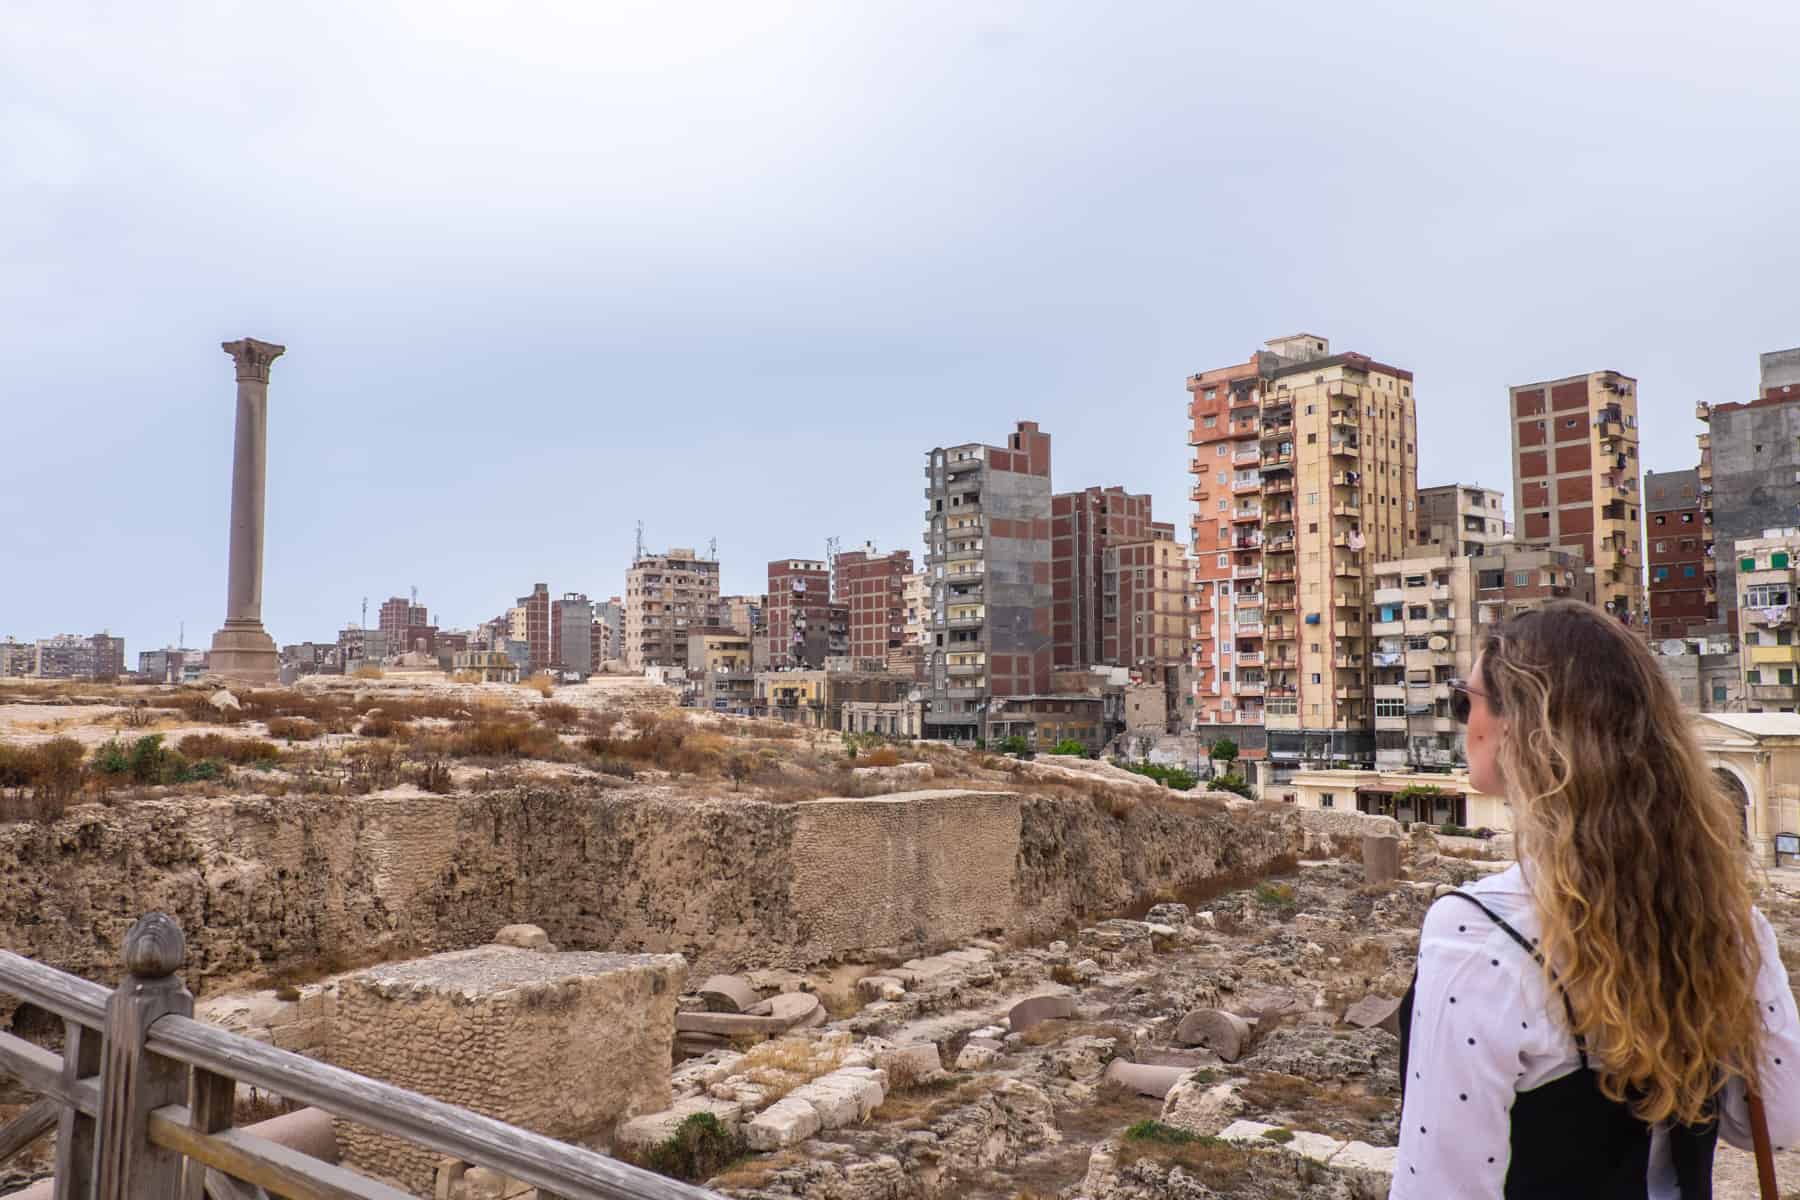 A woman stands overlooking the archaelogical site of Pompey's Pillar in Alexandria, Egypt which is surrounded by modern apartment buildings